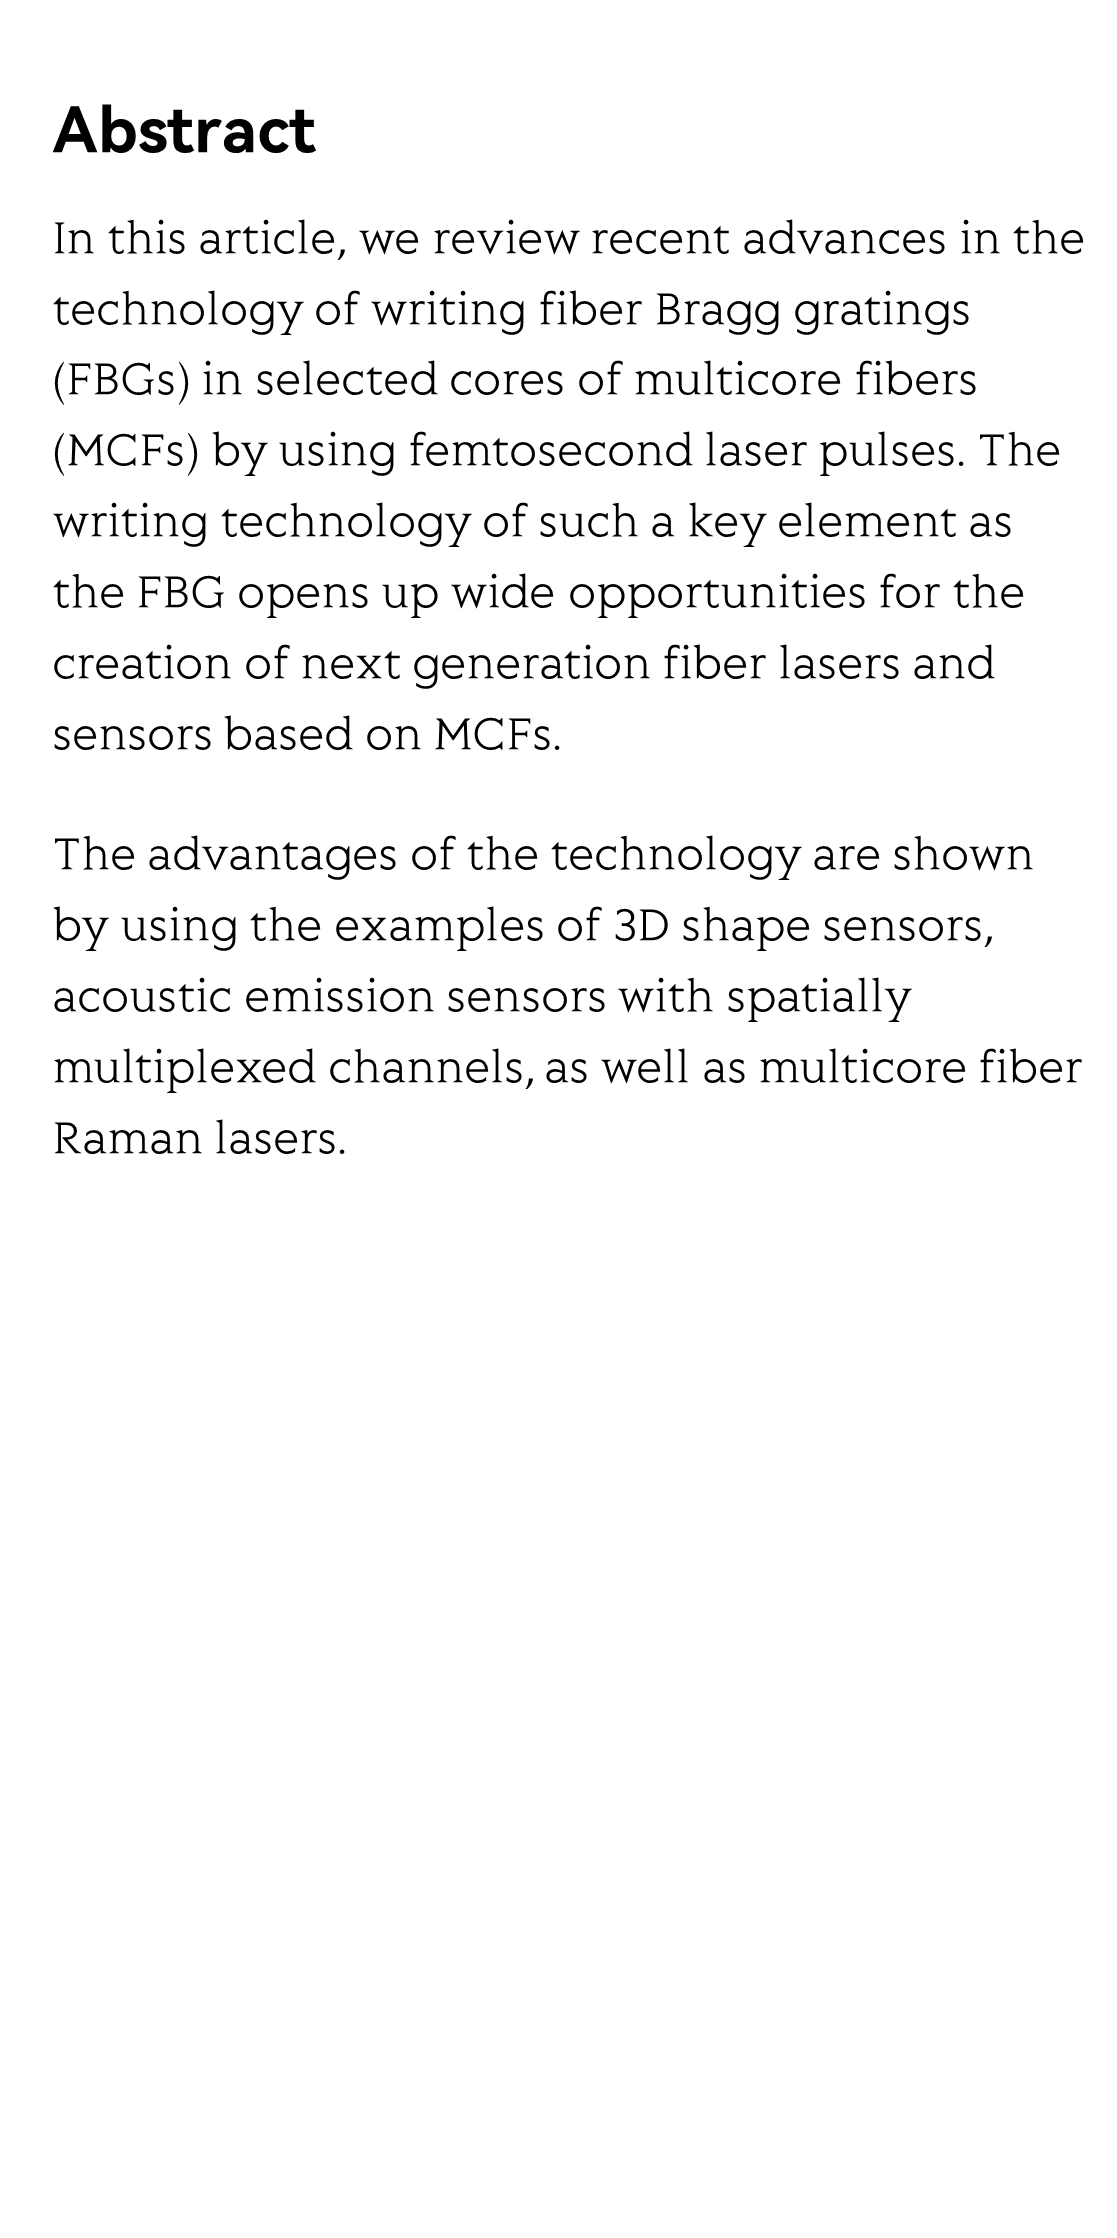 Advances in femtosecond laser direct writing of fiber Bragg gratings in multicore fibers: technology, sensor and laser applications_2